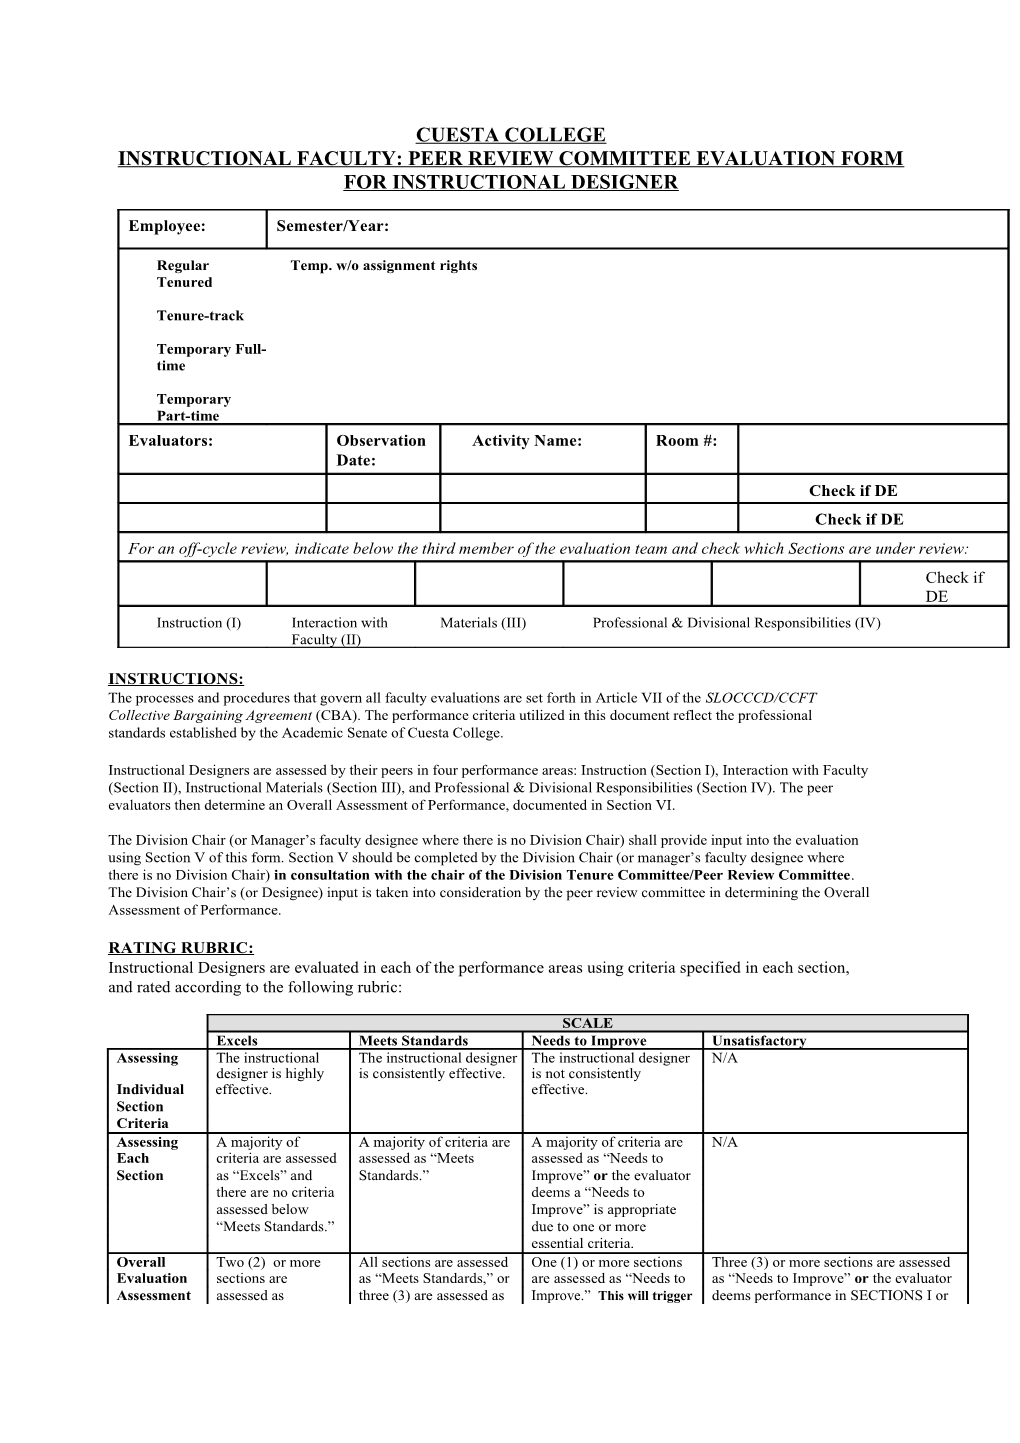 Instructional Faculty: Peer Review Committee Evaluation Form for Instructional Designer